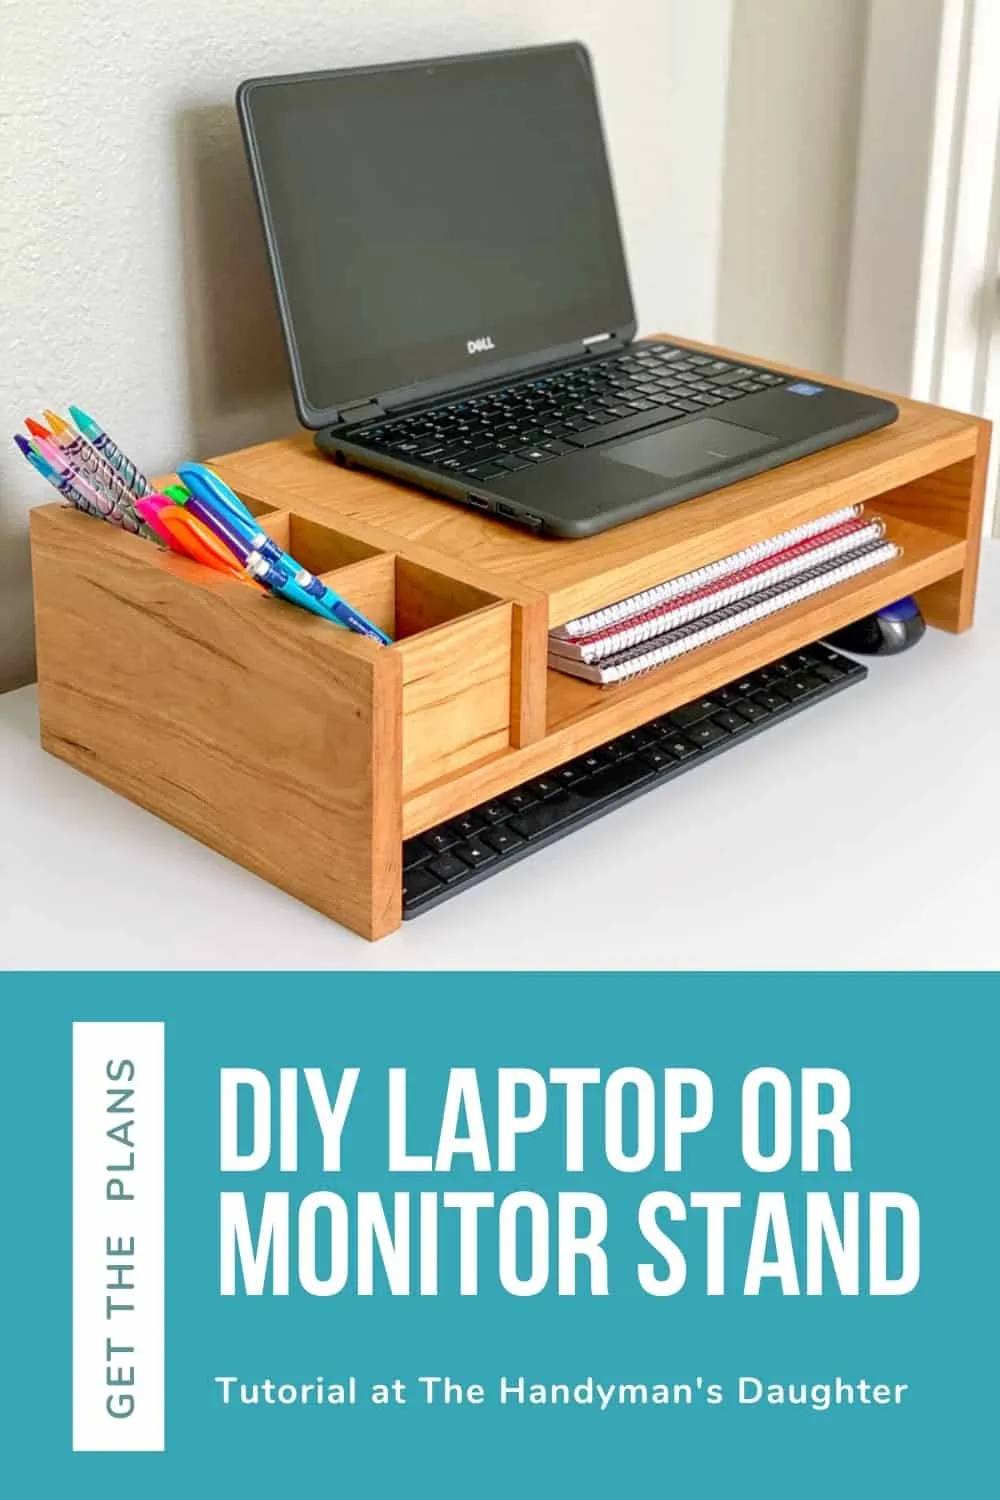 https://www.thehandymansdaughter.com/wp-content/uploads/2020/09/DIY-Laptop-or-Monitor-Stand-Pin-1.jpg.webp